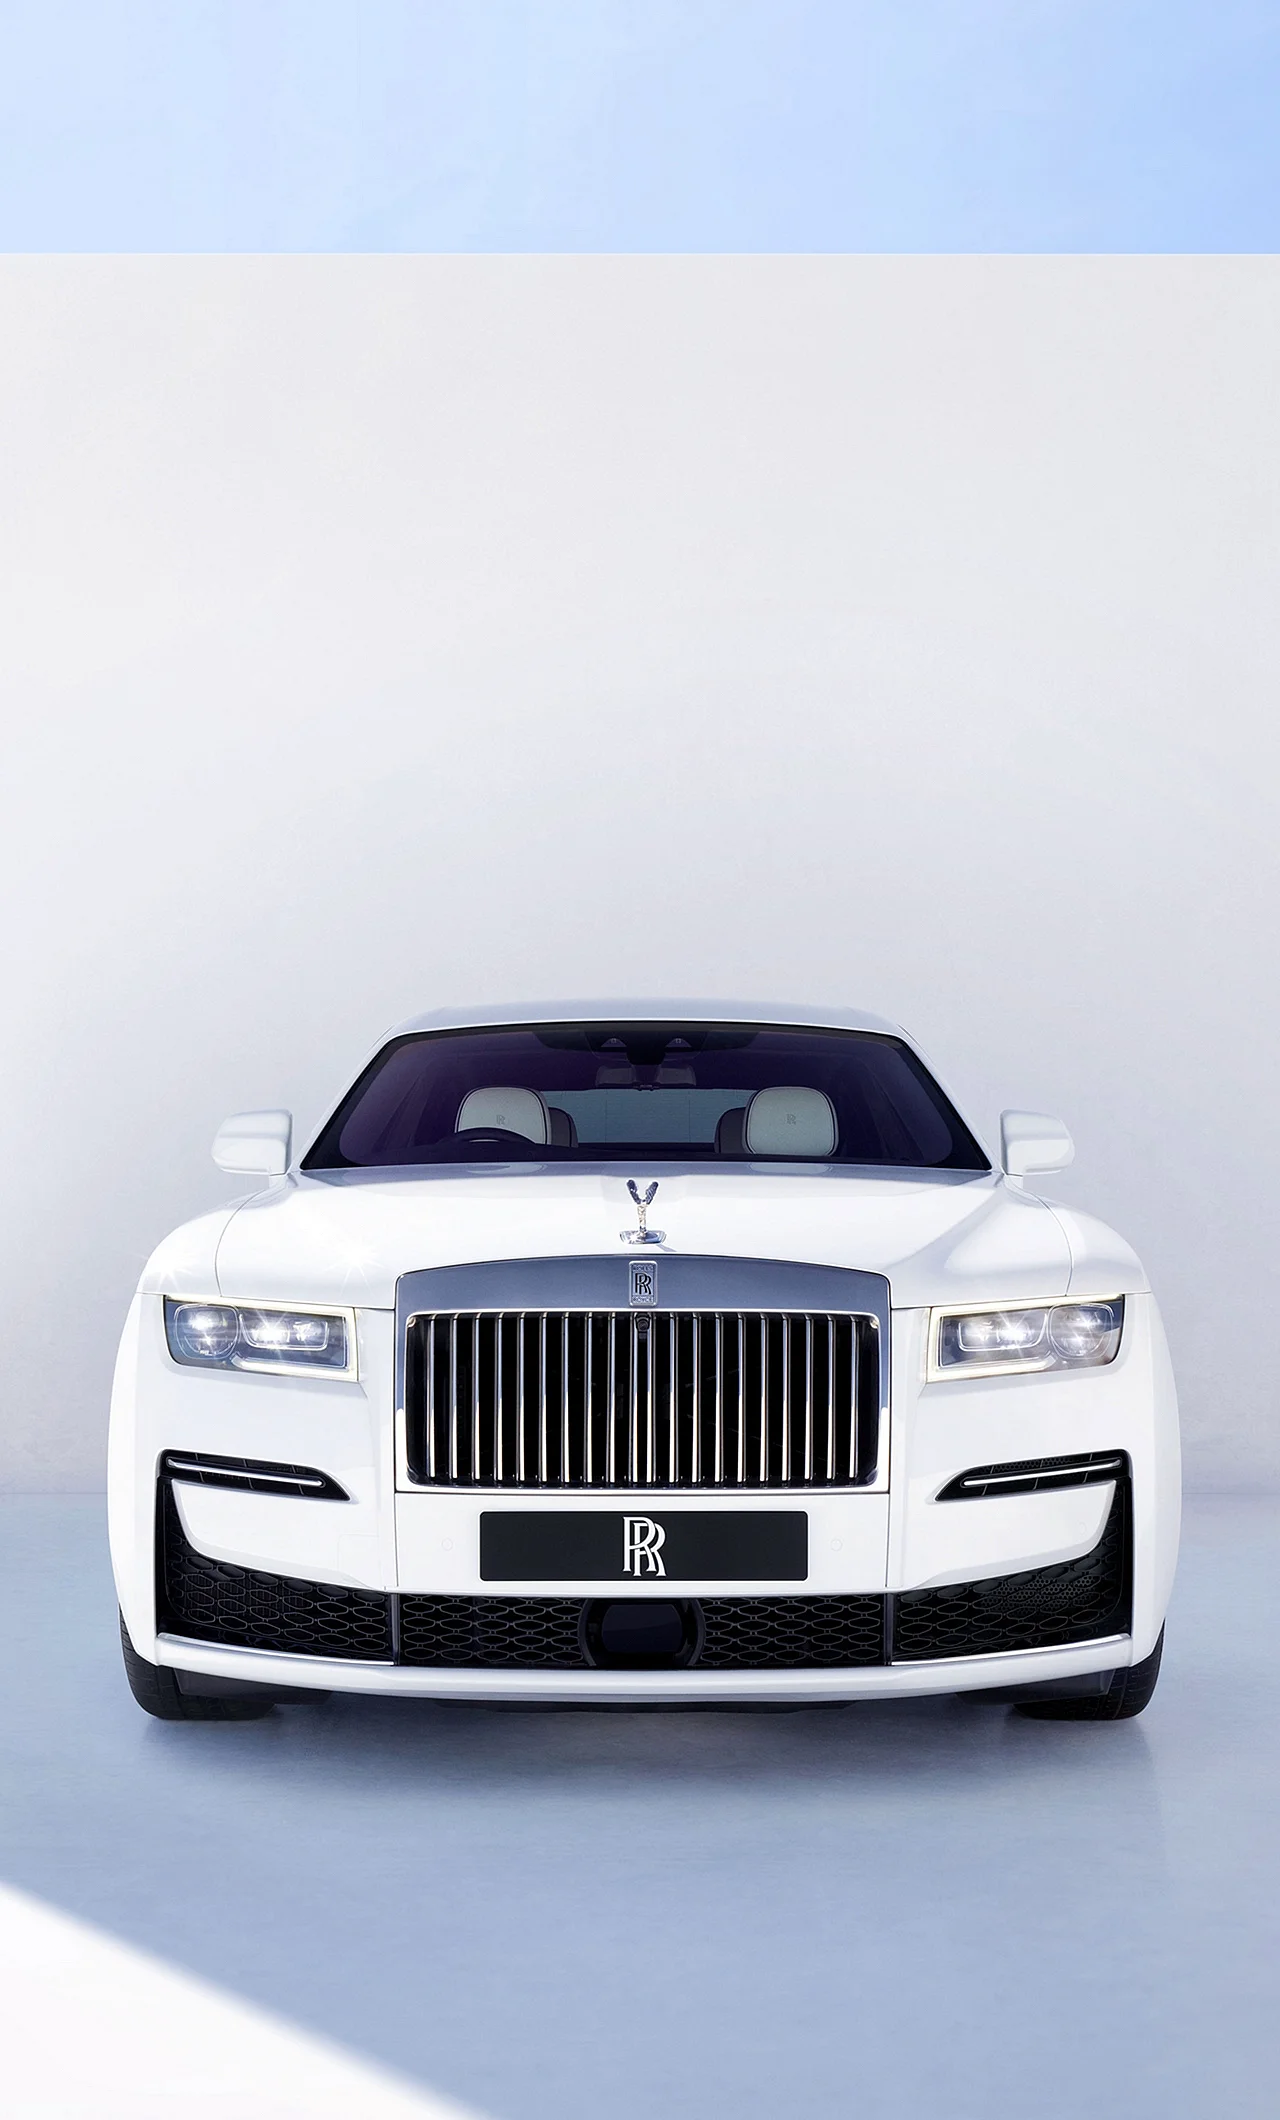 Rolls Royce Ghost 2020 Wallpaper For iPhone